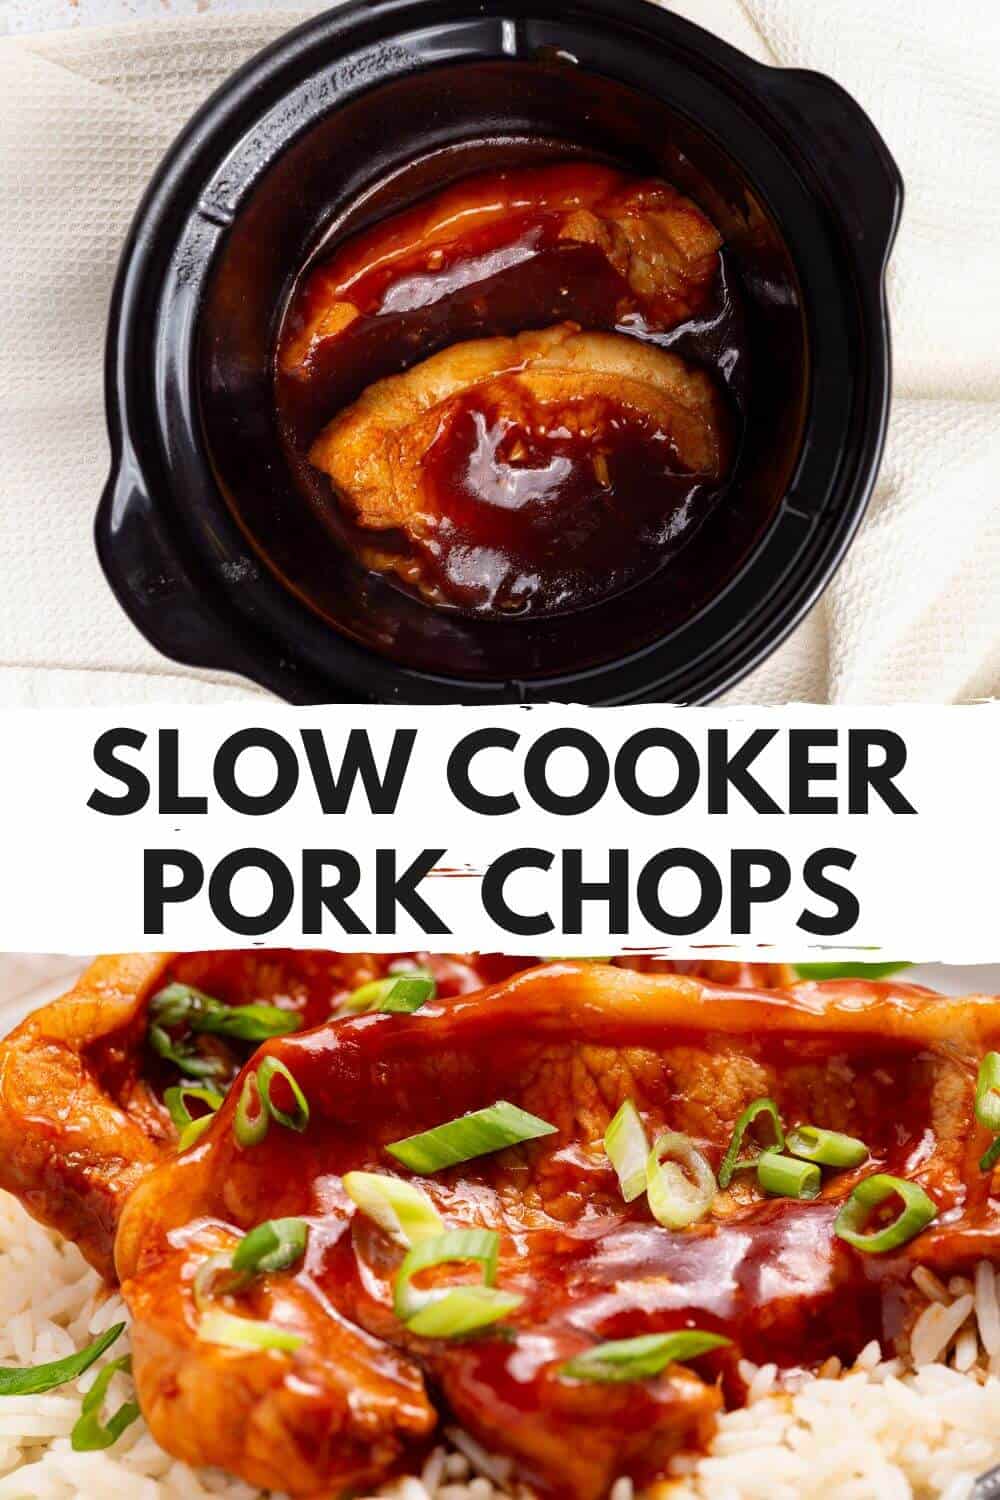 Slow cooker pork chops with rice on top.